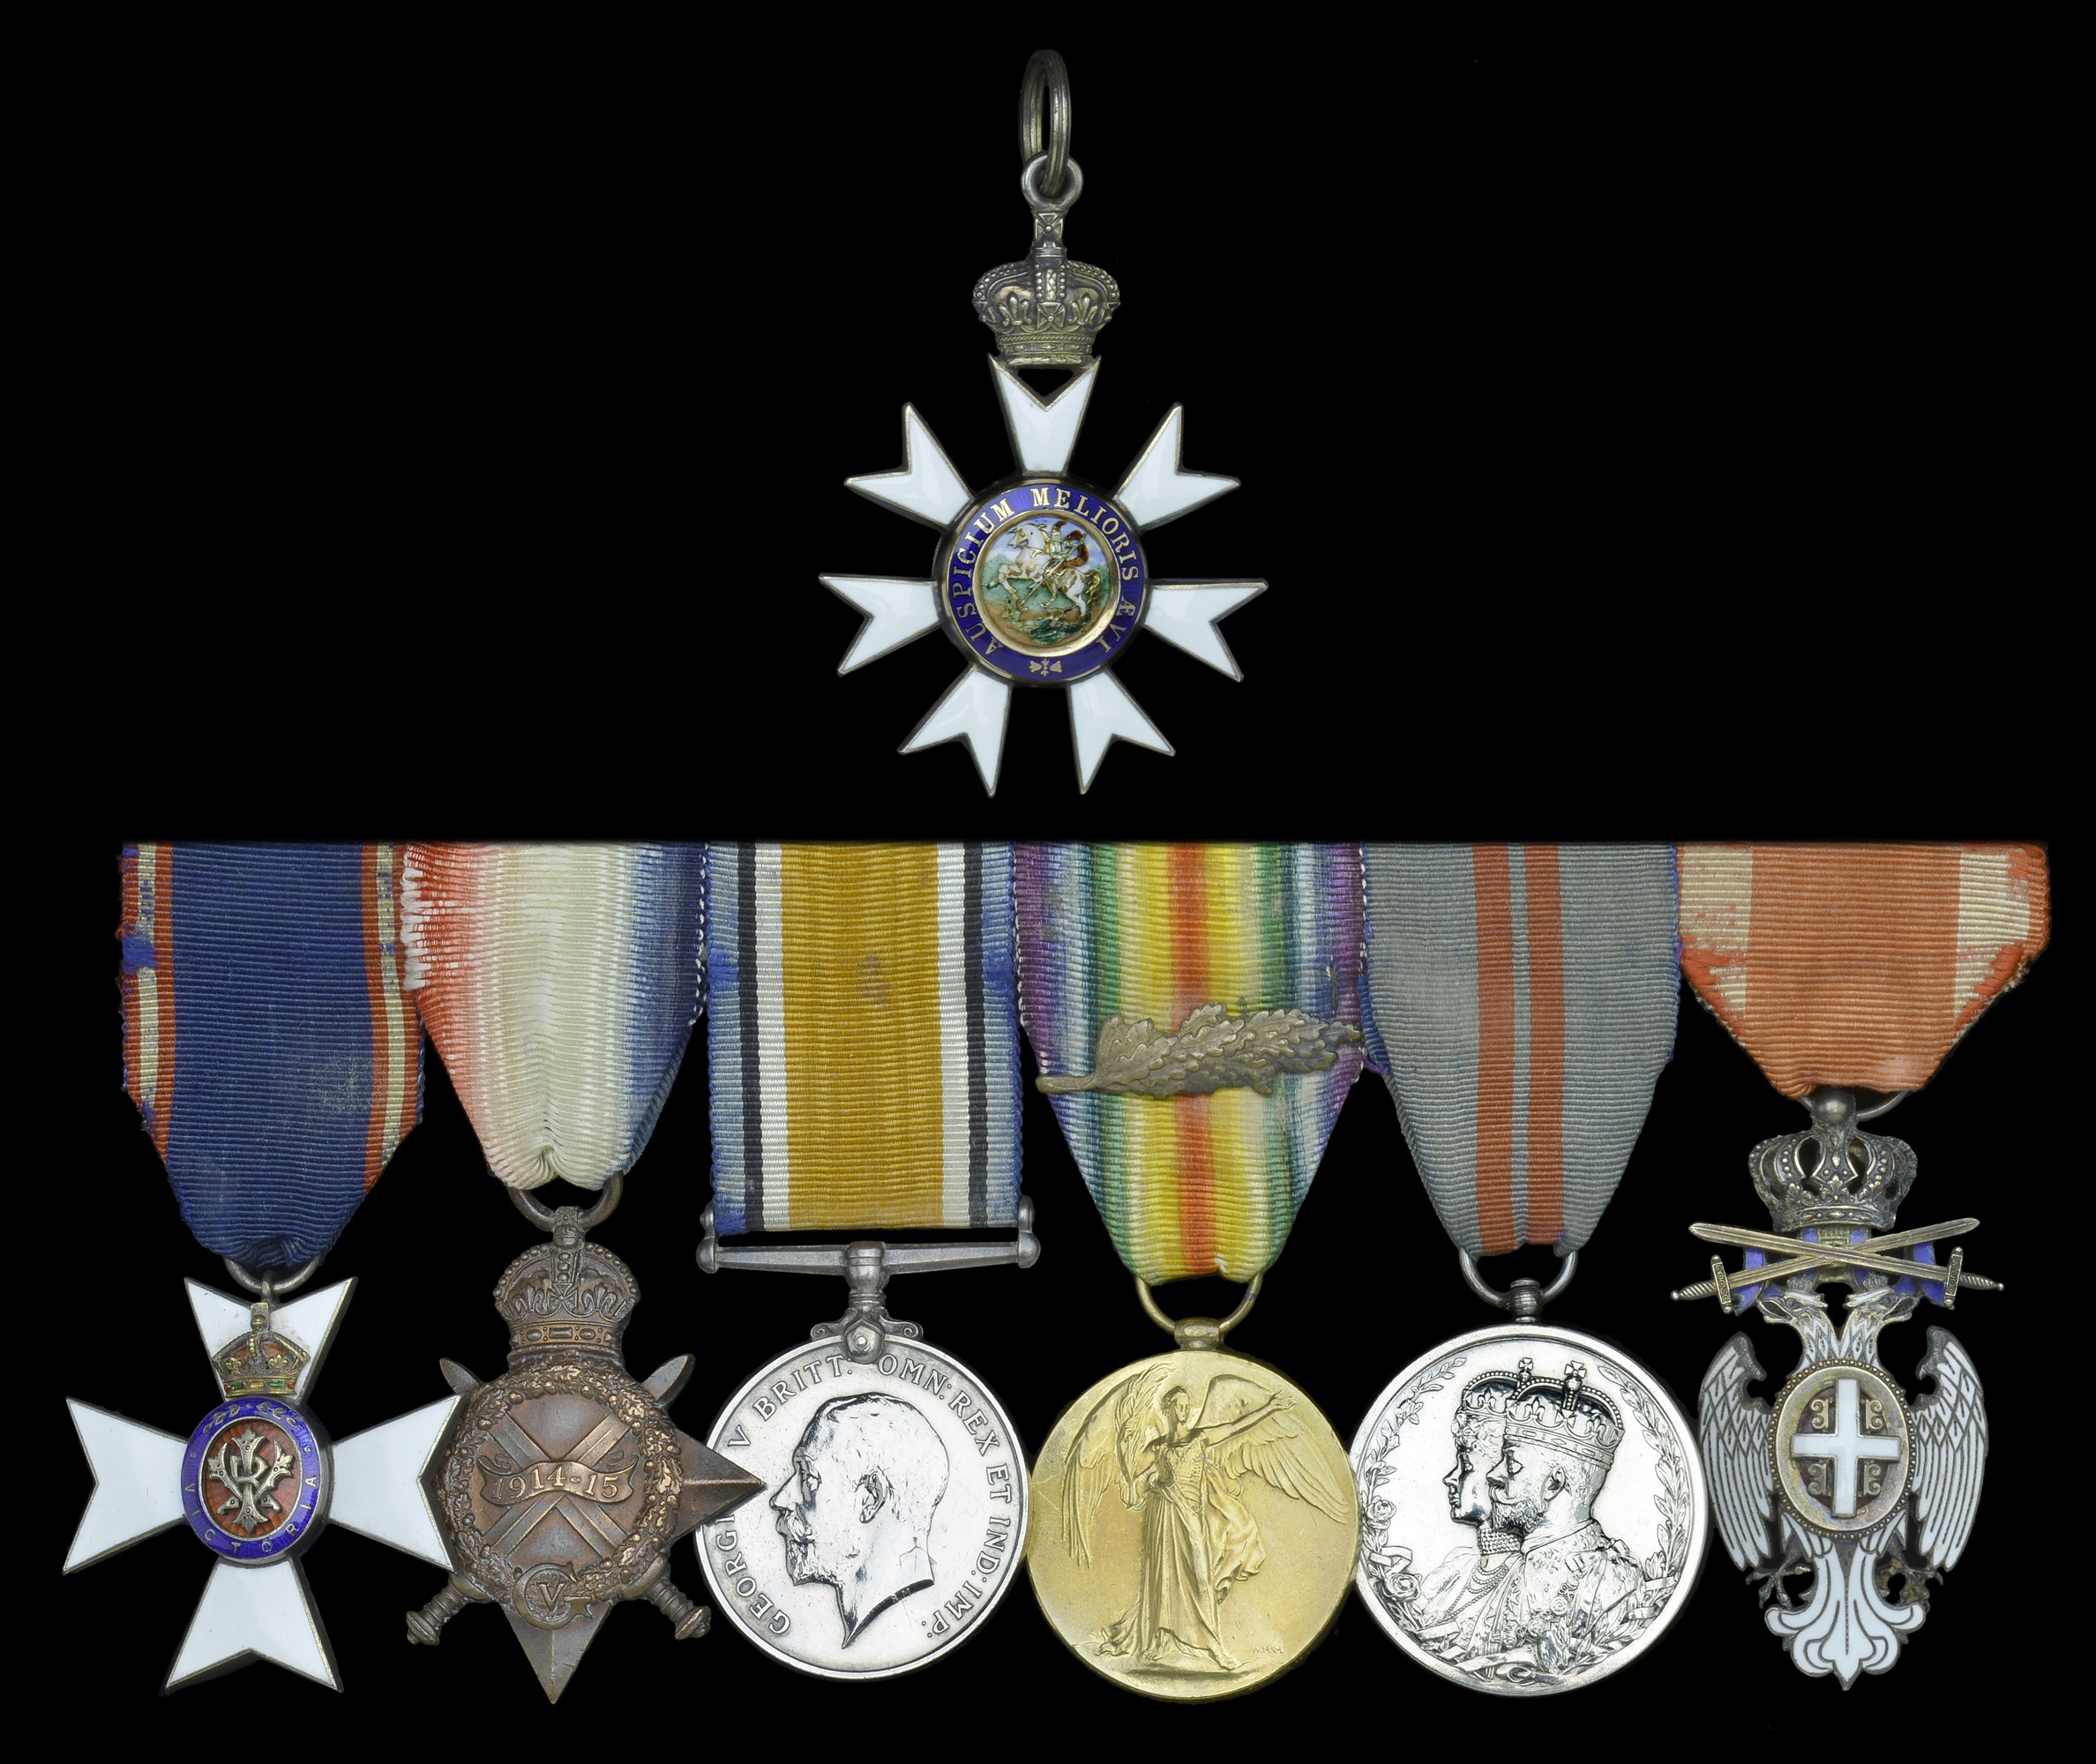 British Army Medals of Arthur Henry Dopping Creagh